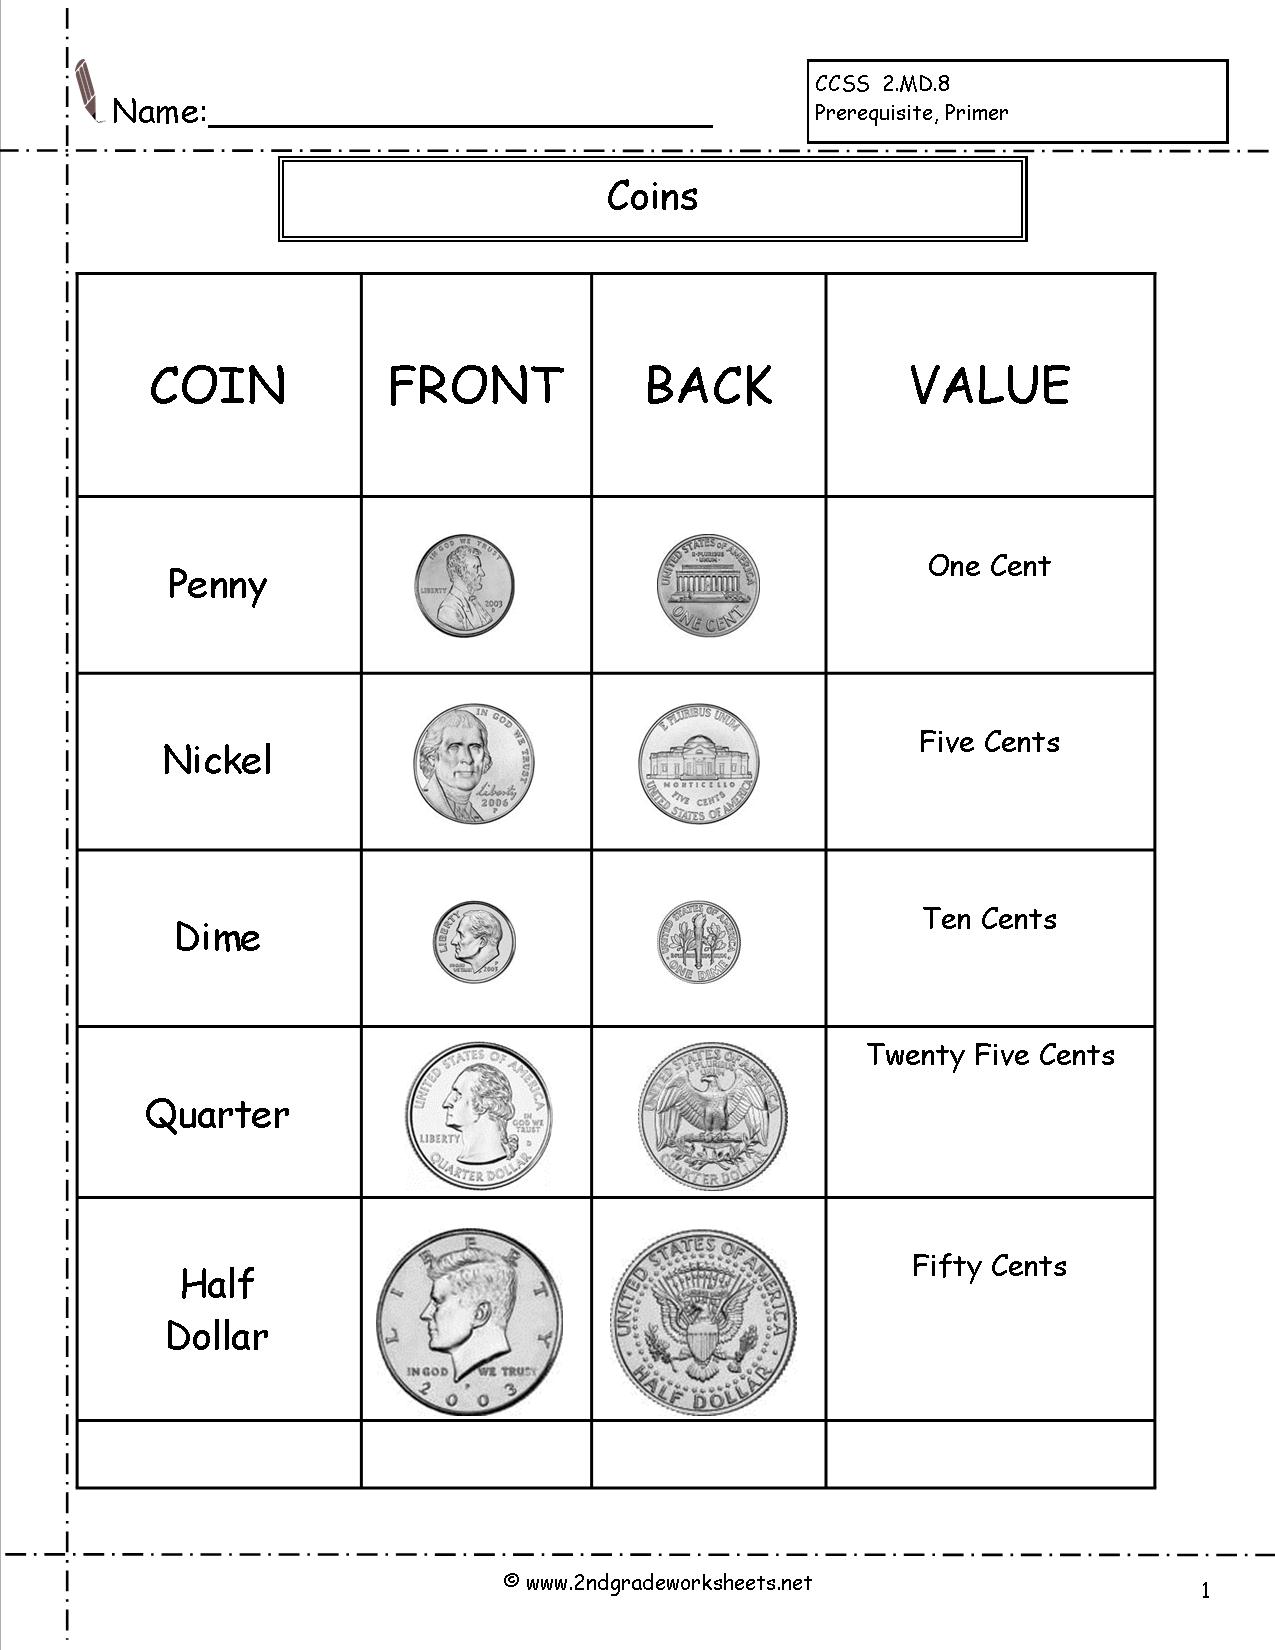 18 Best Images of CCSS Math Worksheets Common Core 2nd